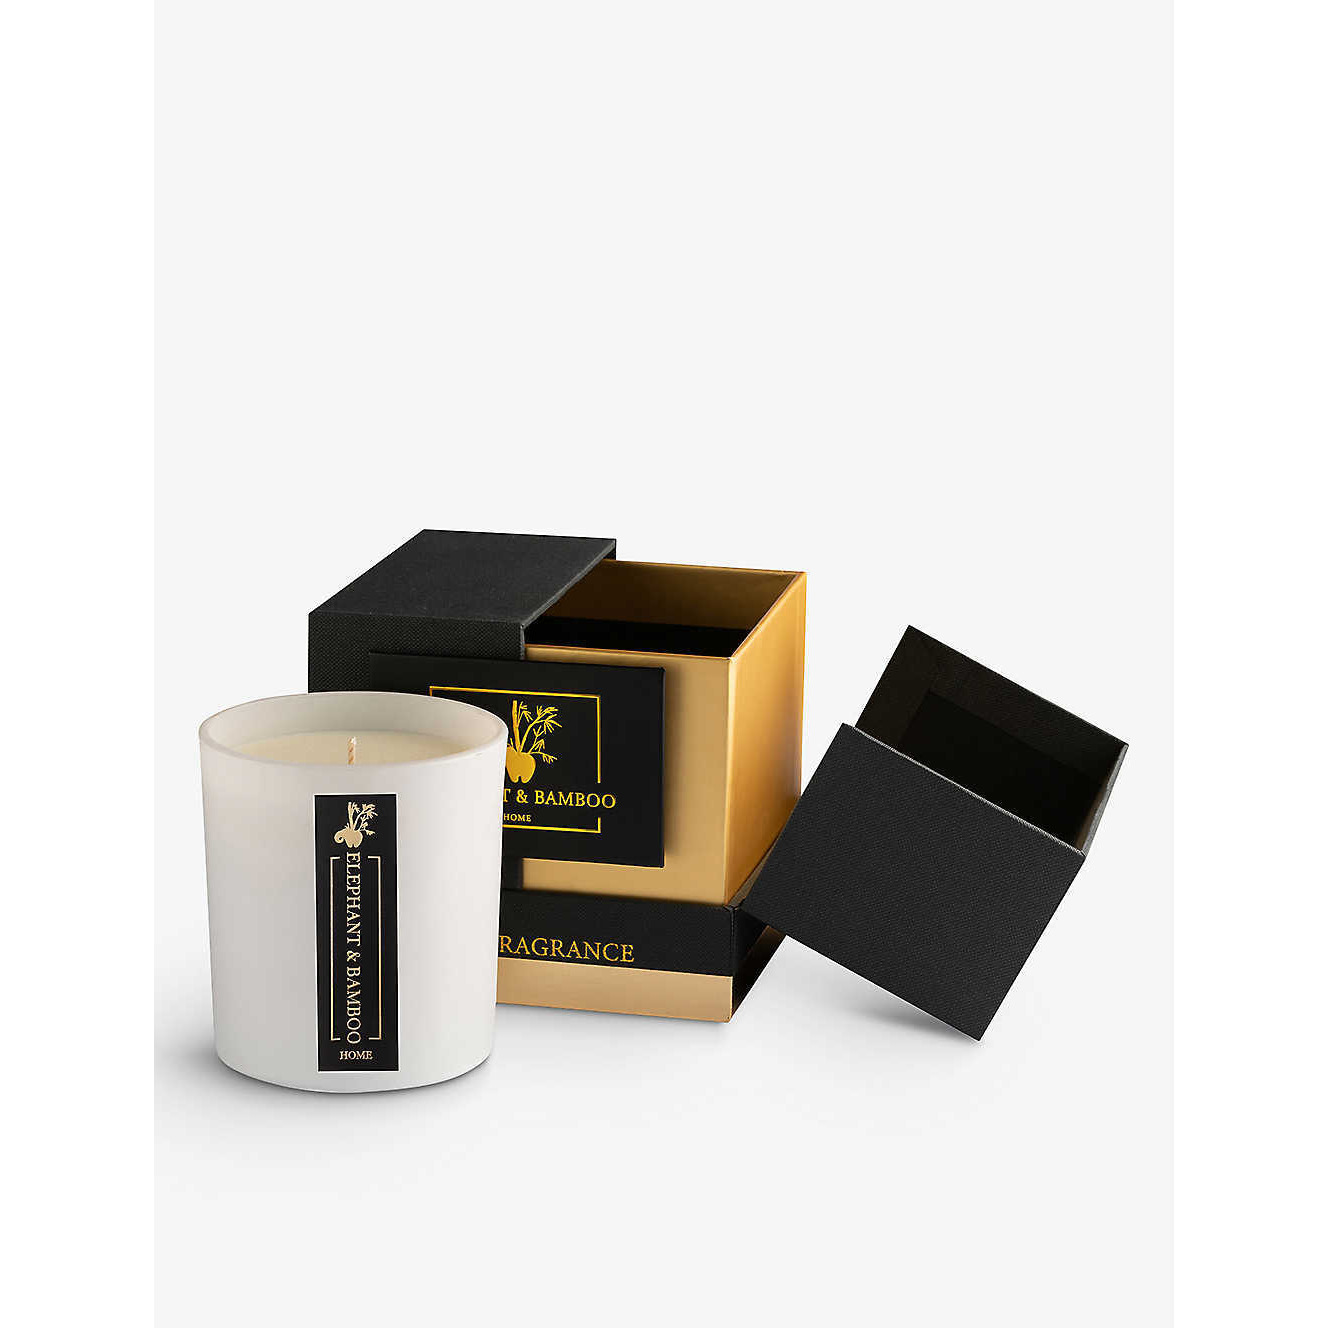 Jasmine & Magnolia soy and coconut wax candle 300g - image 1